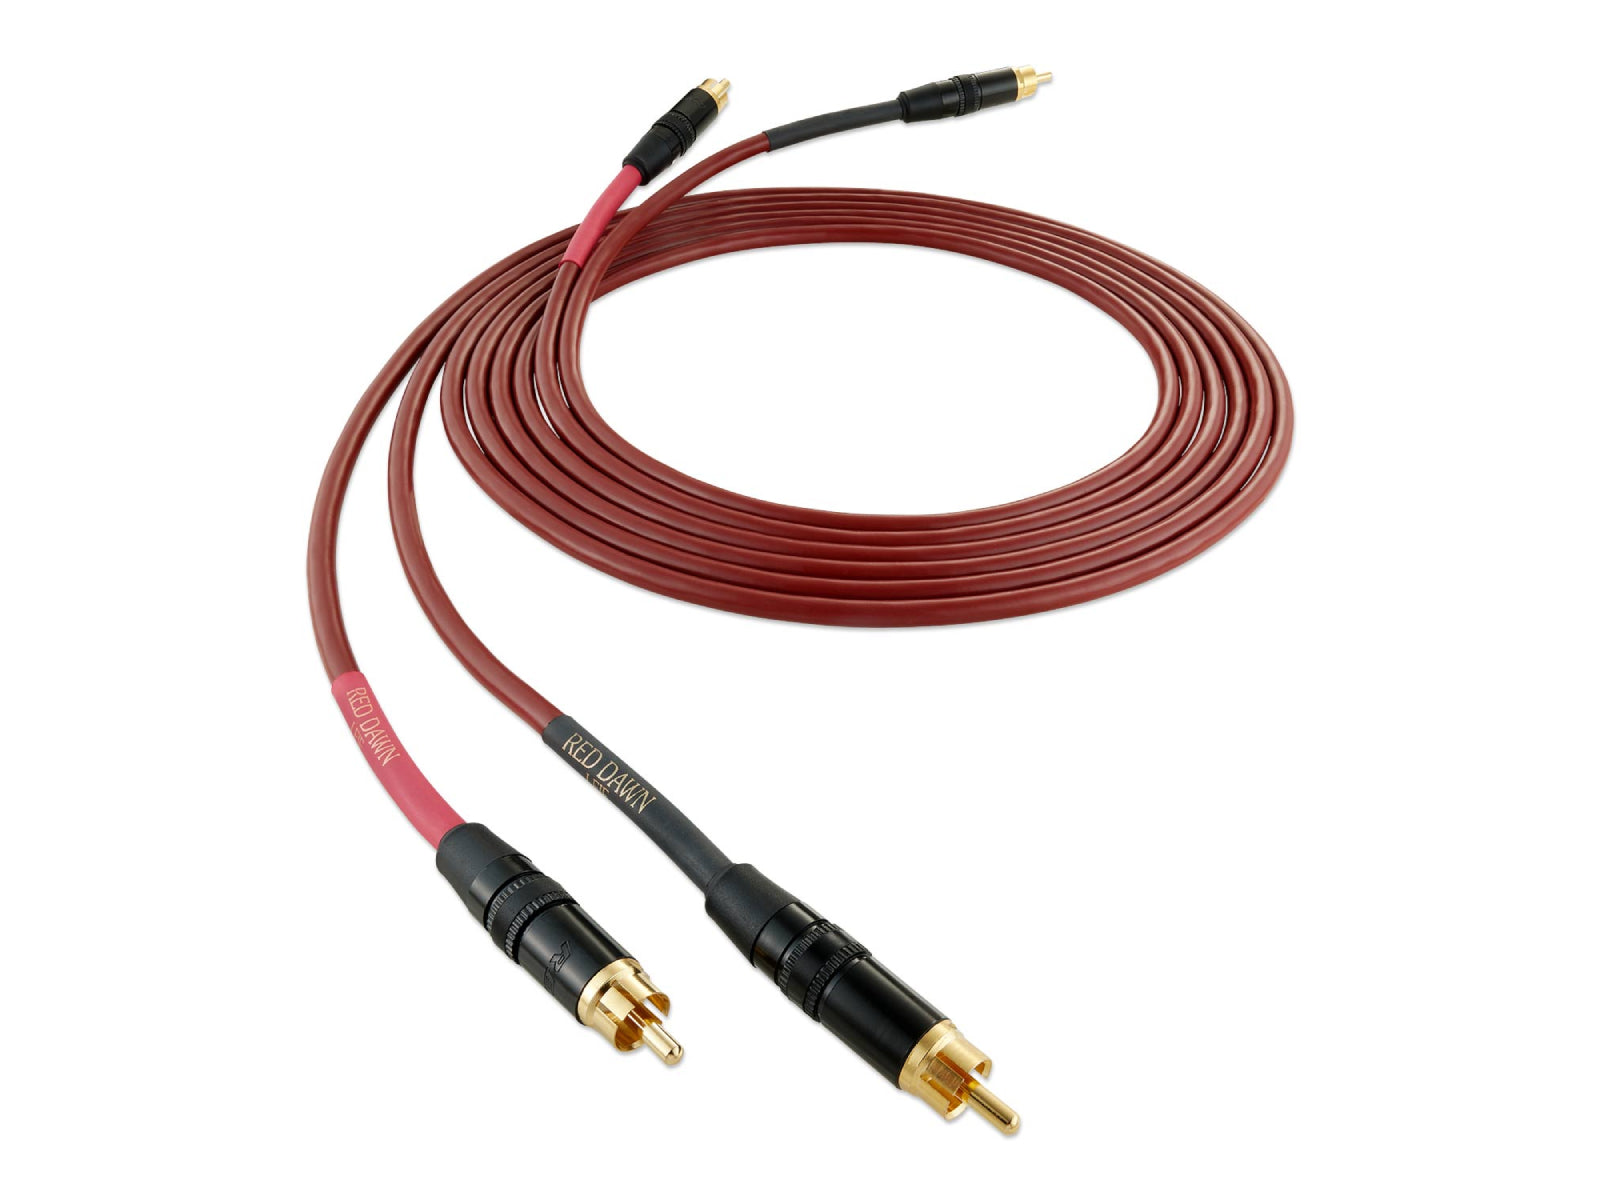 Nordost Red Dawn RCA Analogue